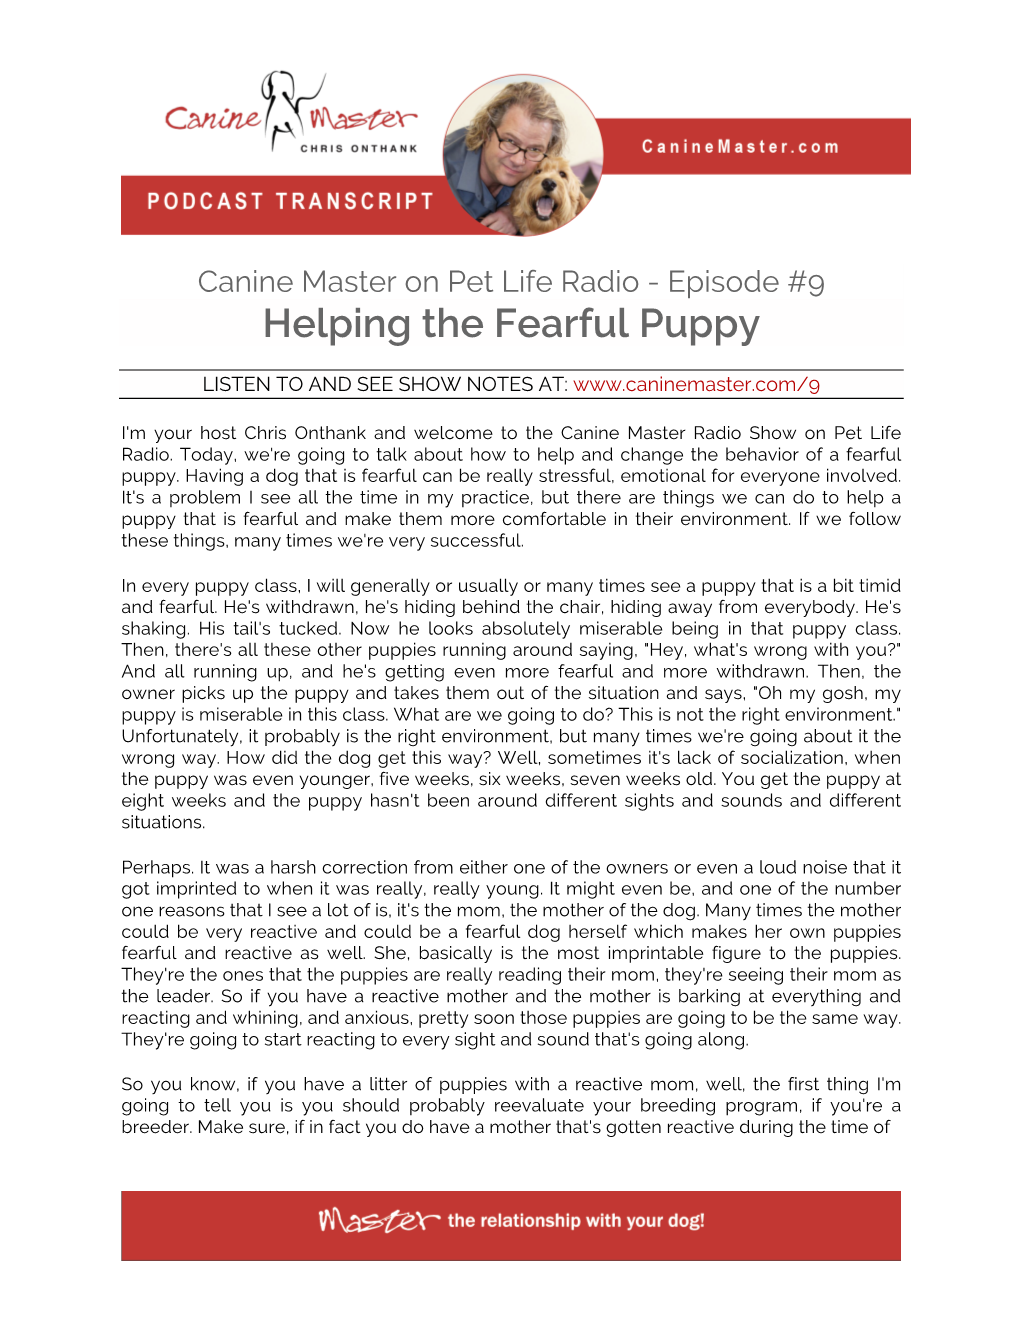 Helping the Fearful Puppy